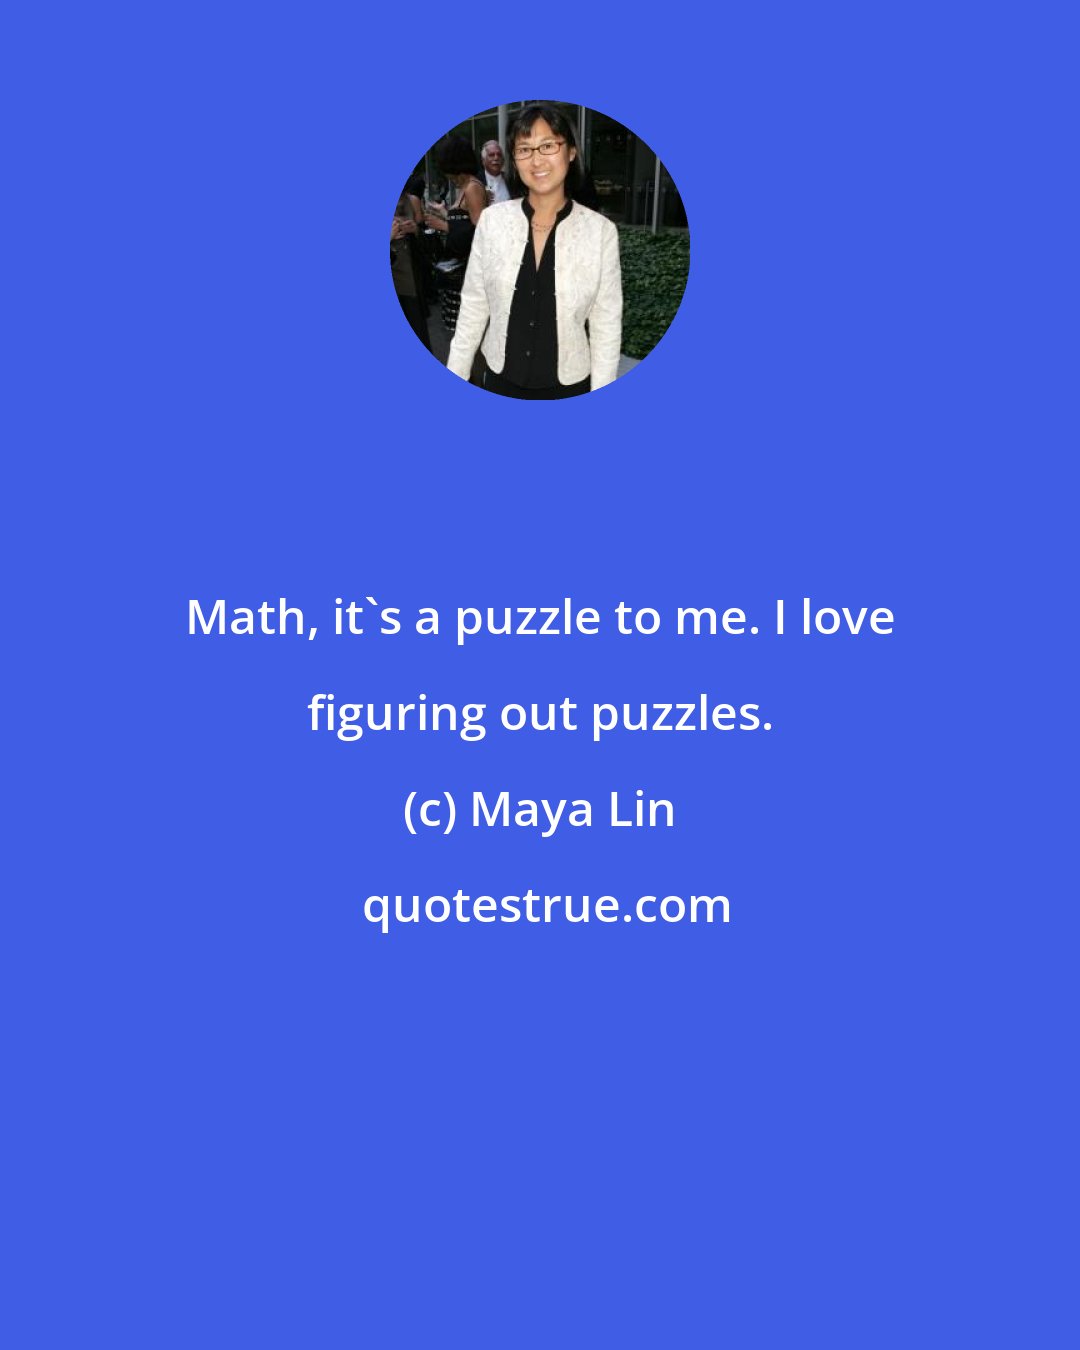 Maya Lin: Math, it's a puzzle to me. I love figuring out puzzles.